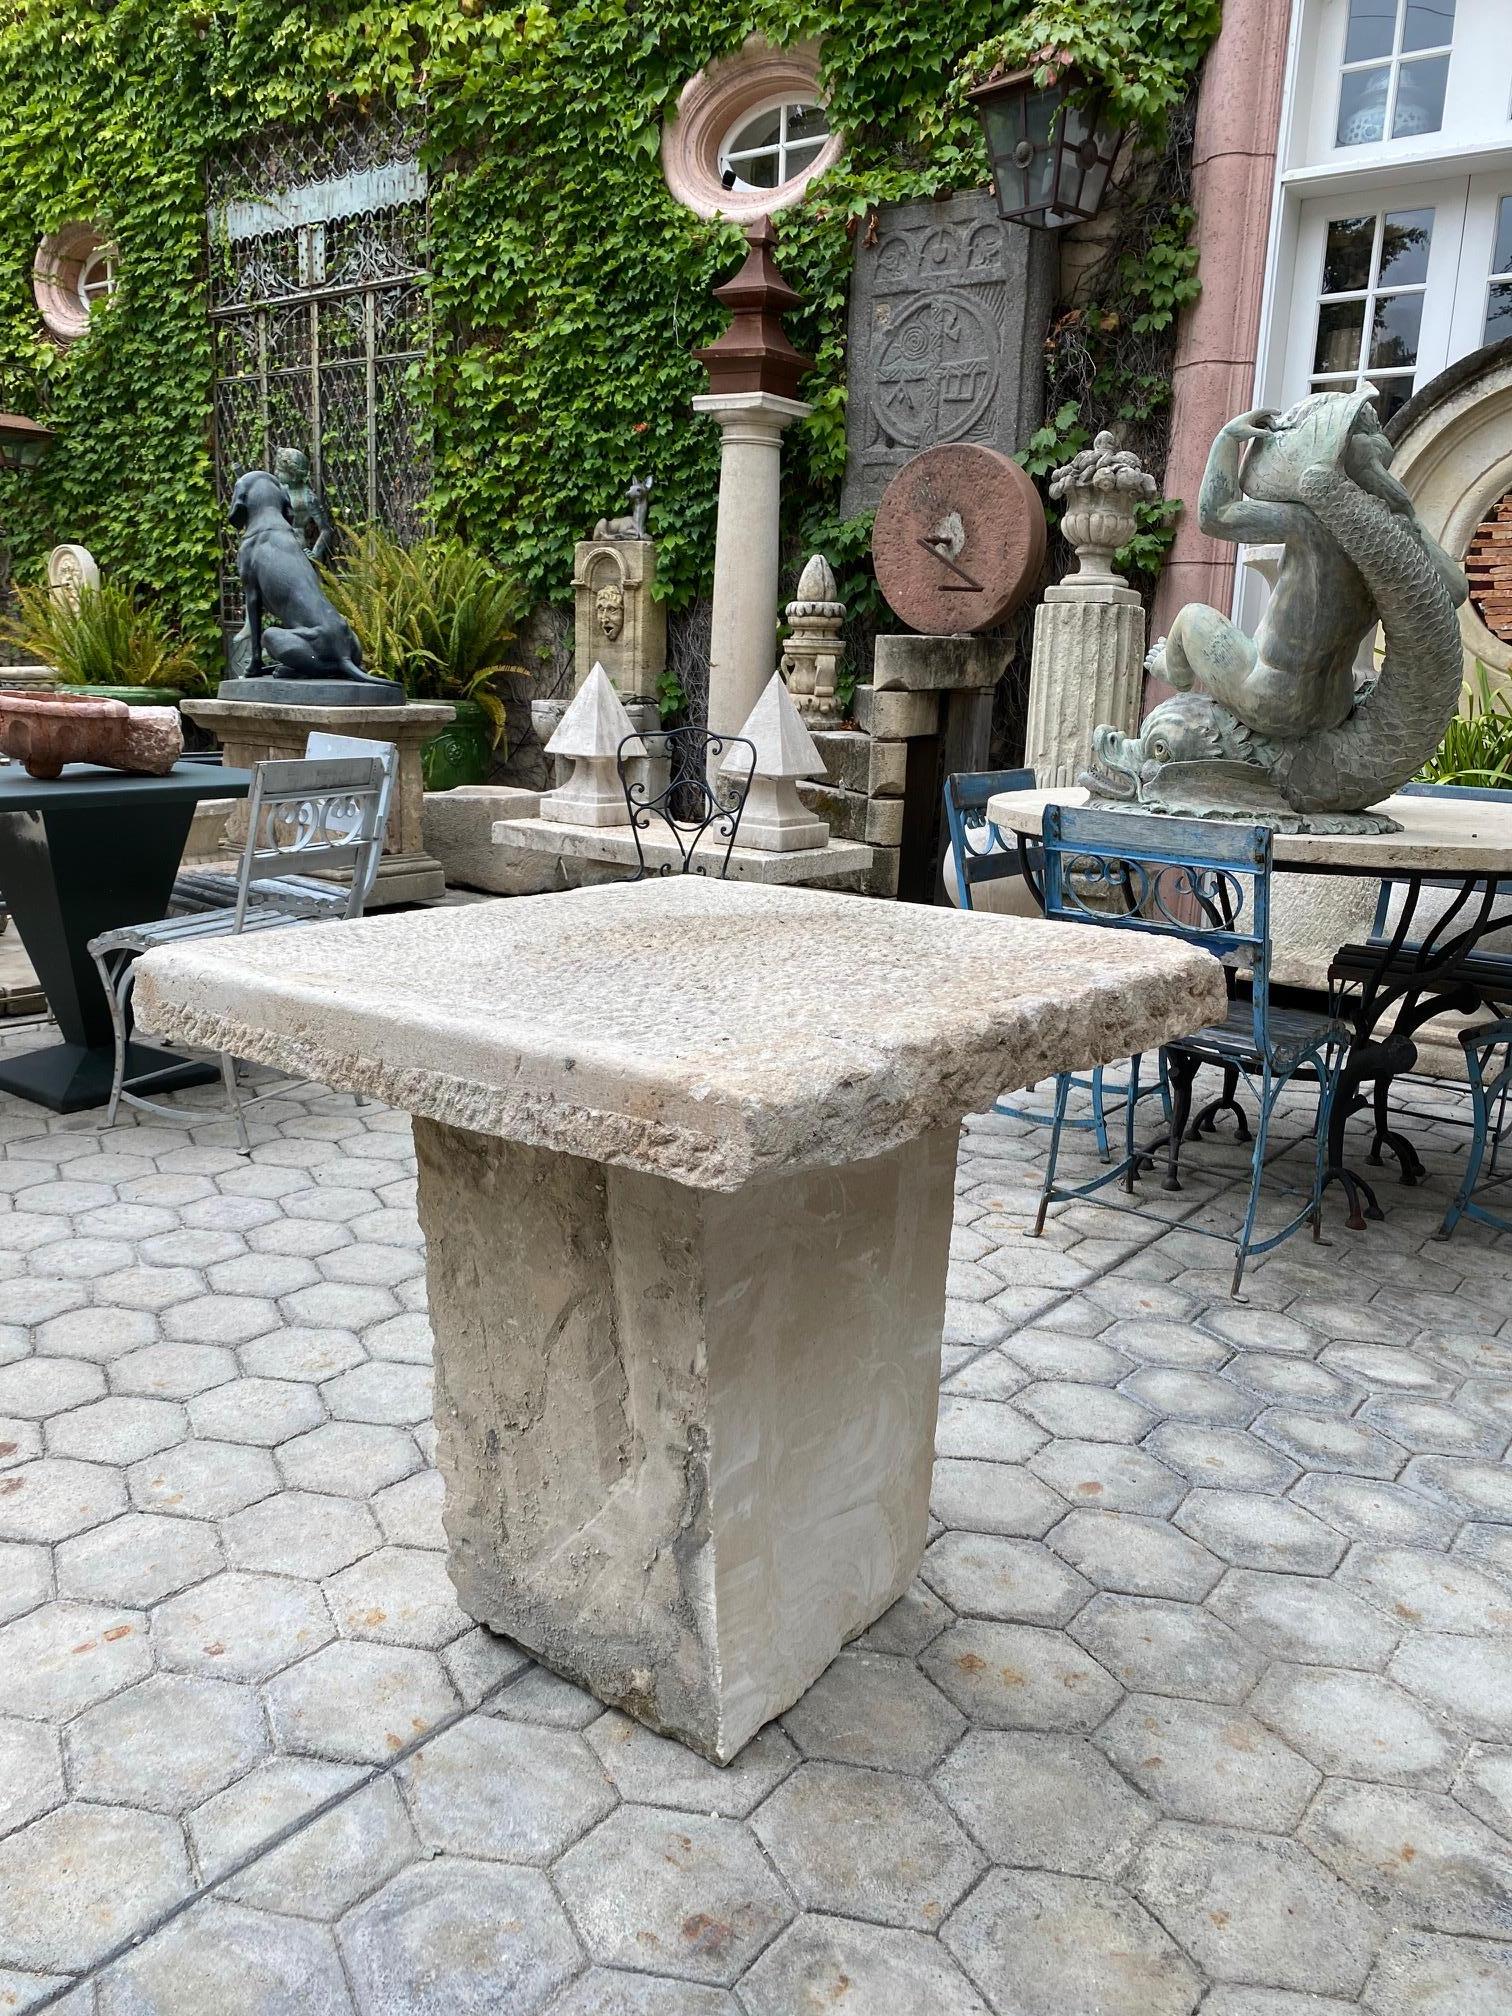 18th-early 19th century elements Hand carved stone antique garden patio coffee outdoor indoor table for two or four. It will be the perfect touch by an outdoor fireplace or on the patio next to your bedroom to have the morning coffee and welcome a